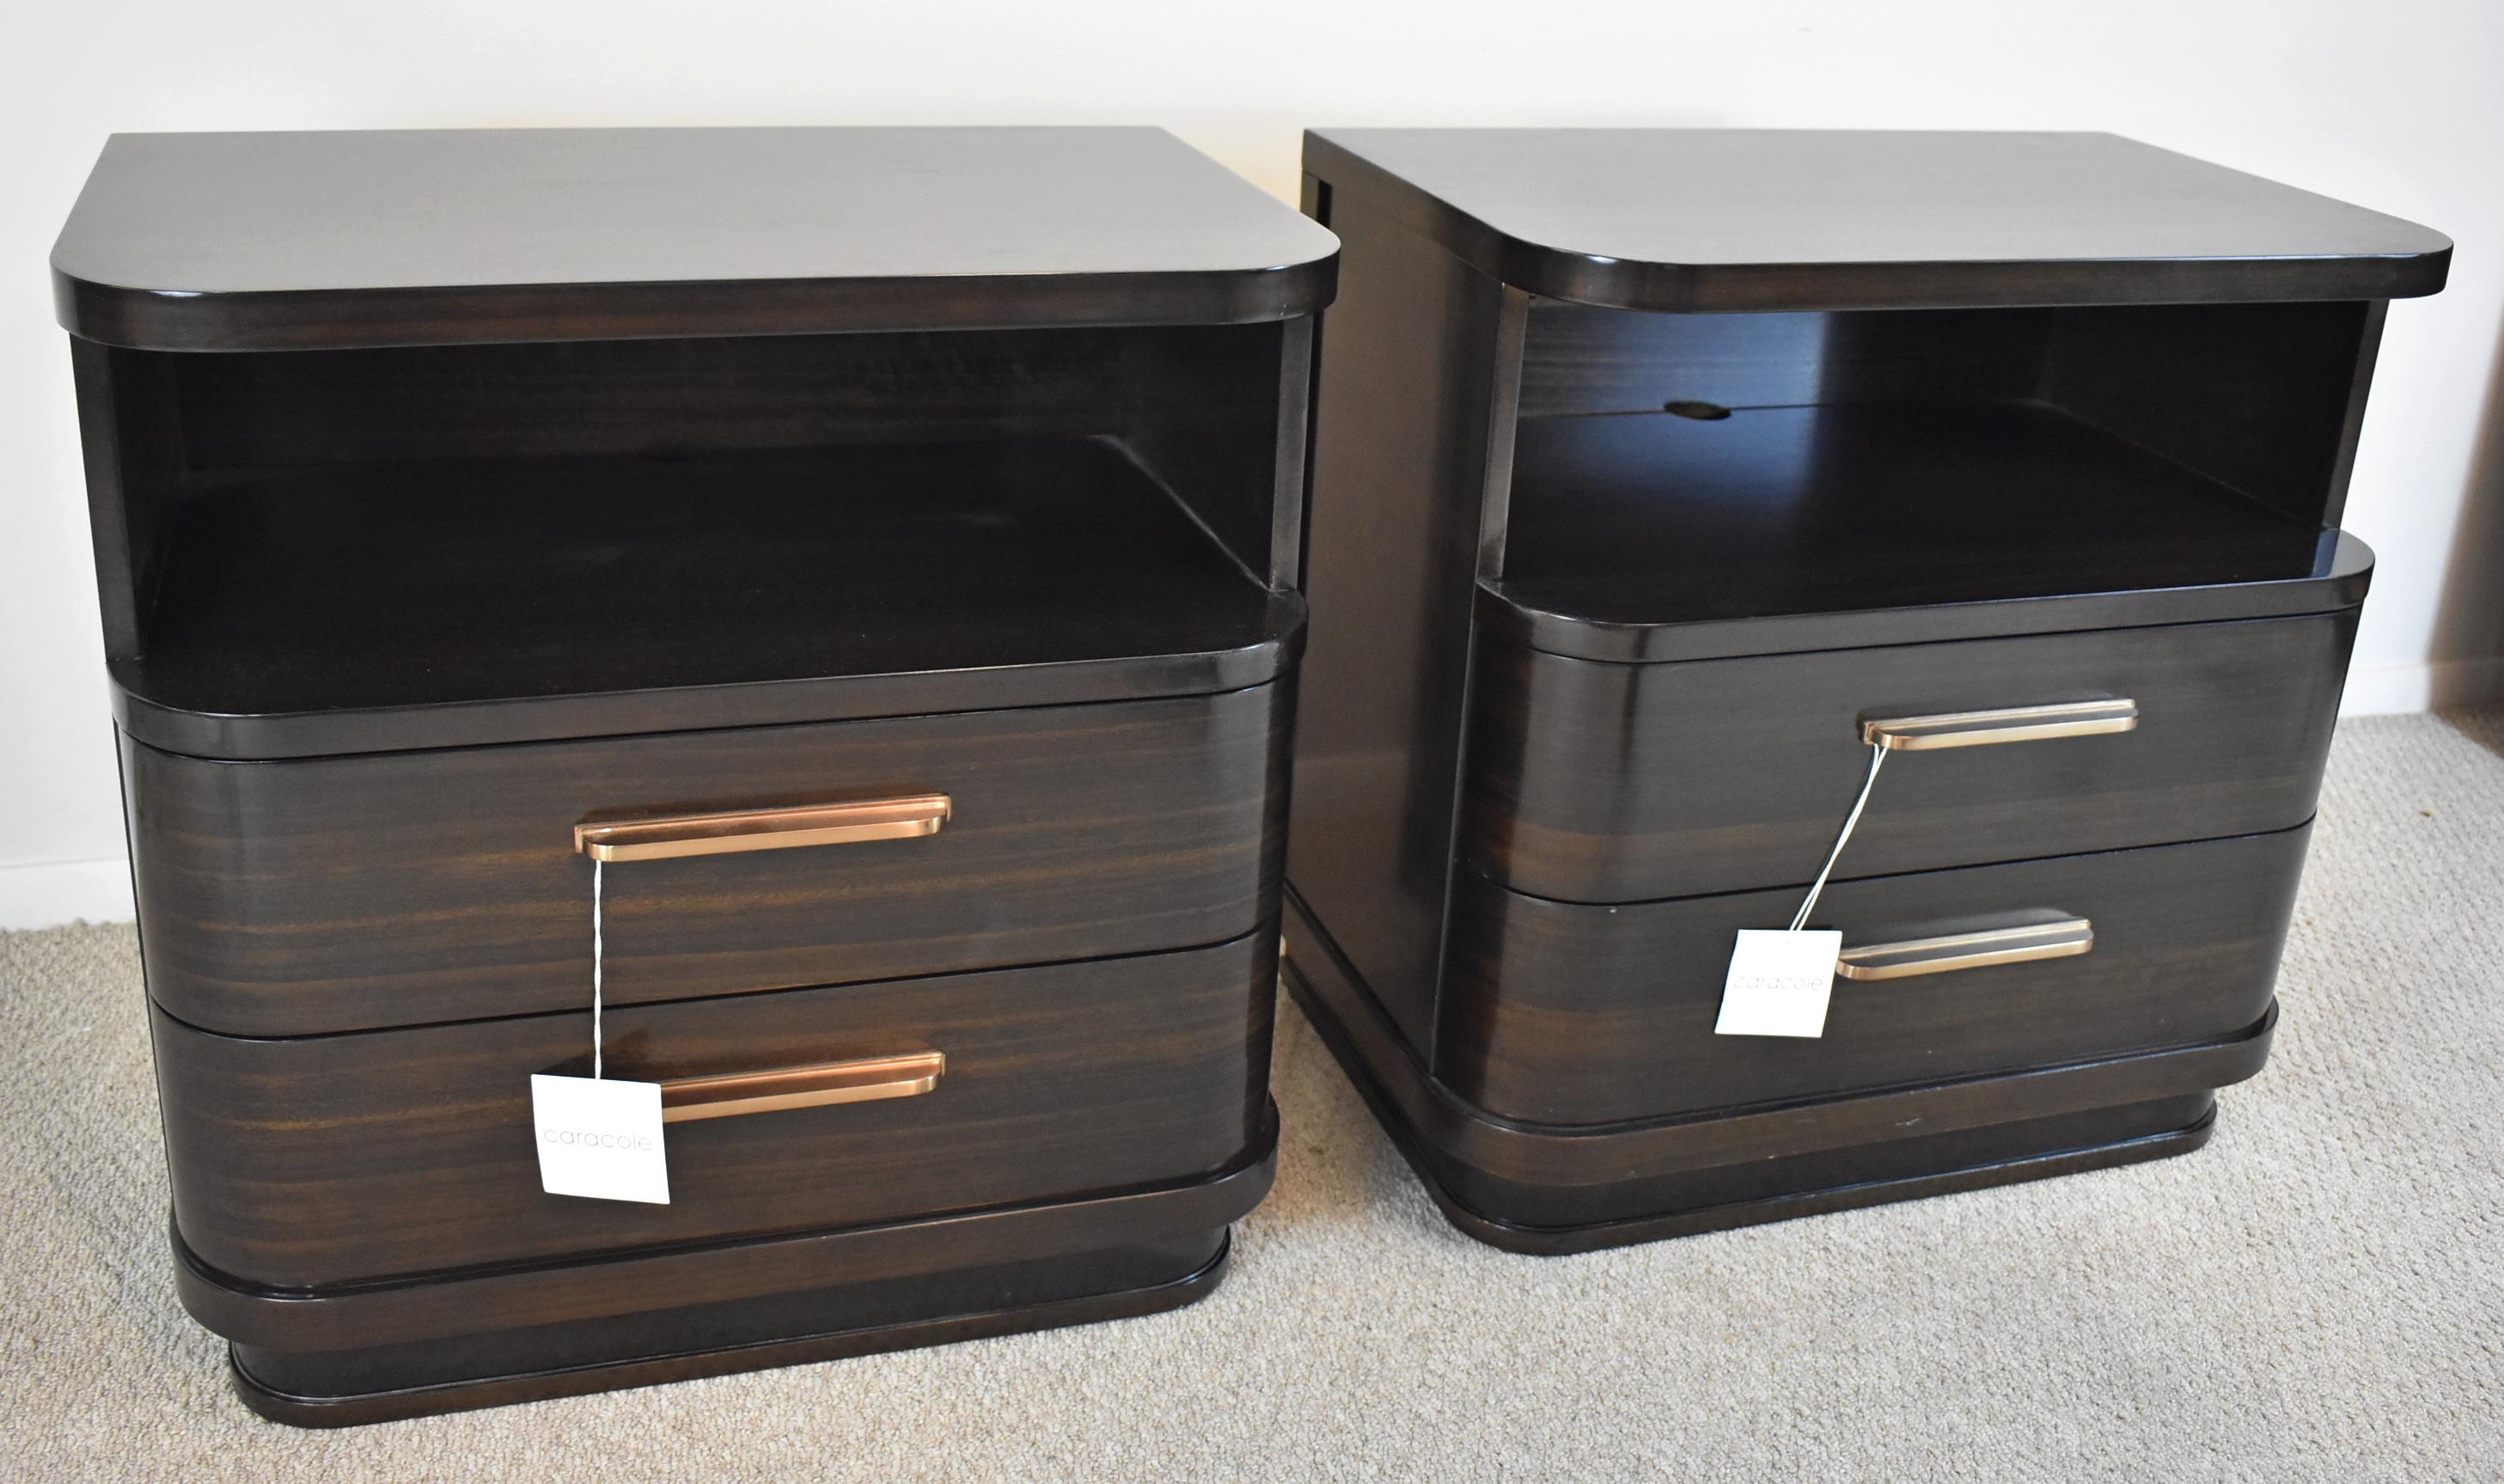 Pair of Espresso Finish Caracole Streamline Nightstands. Circa 1940's. Modern dark stained Mahogany stands with sporting rounded corners a solid recessed plinth base and retro-era Coppertone hardware handles. Open compartment with wire access